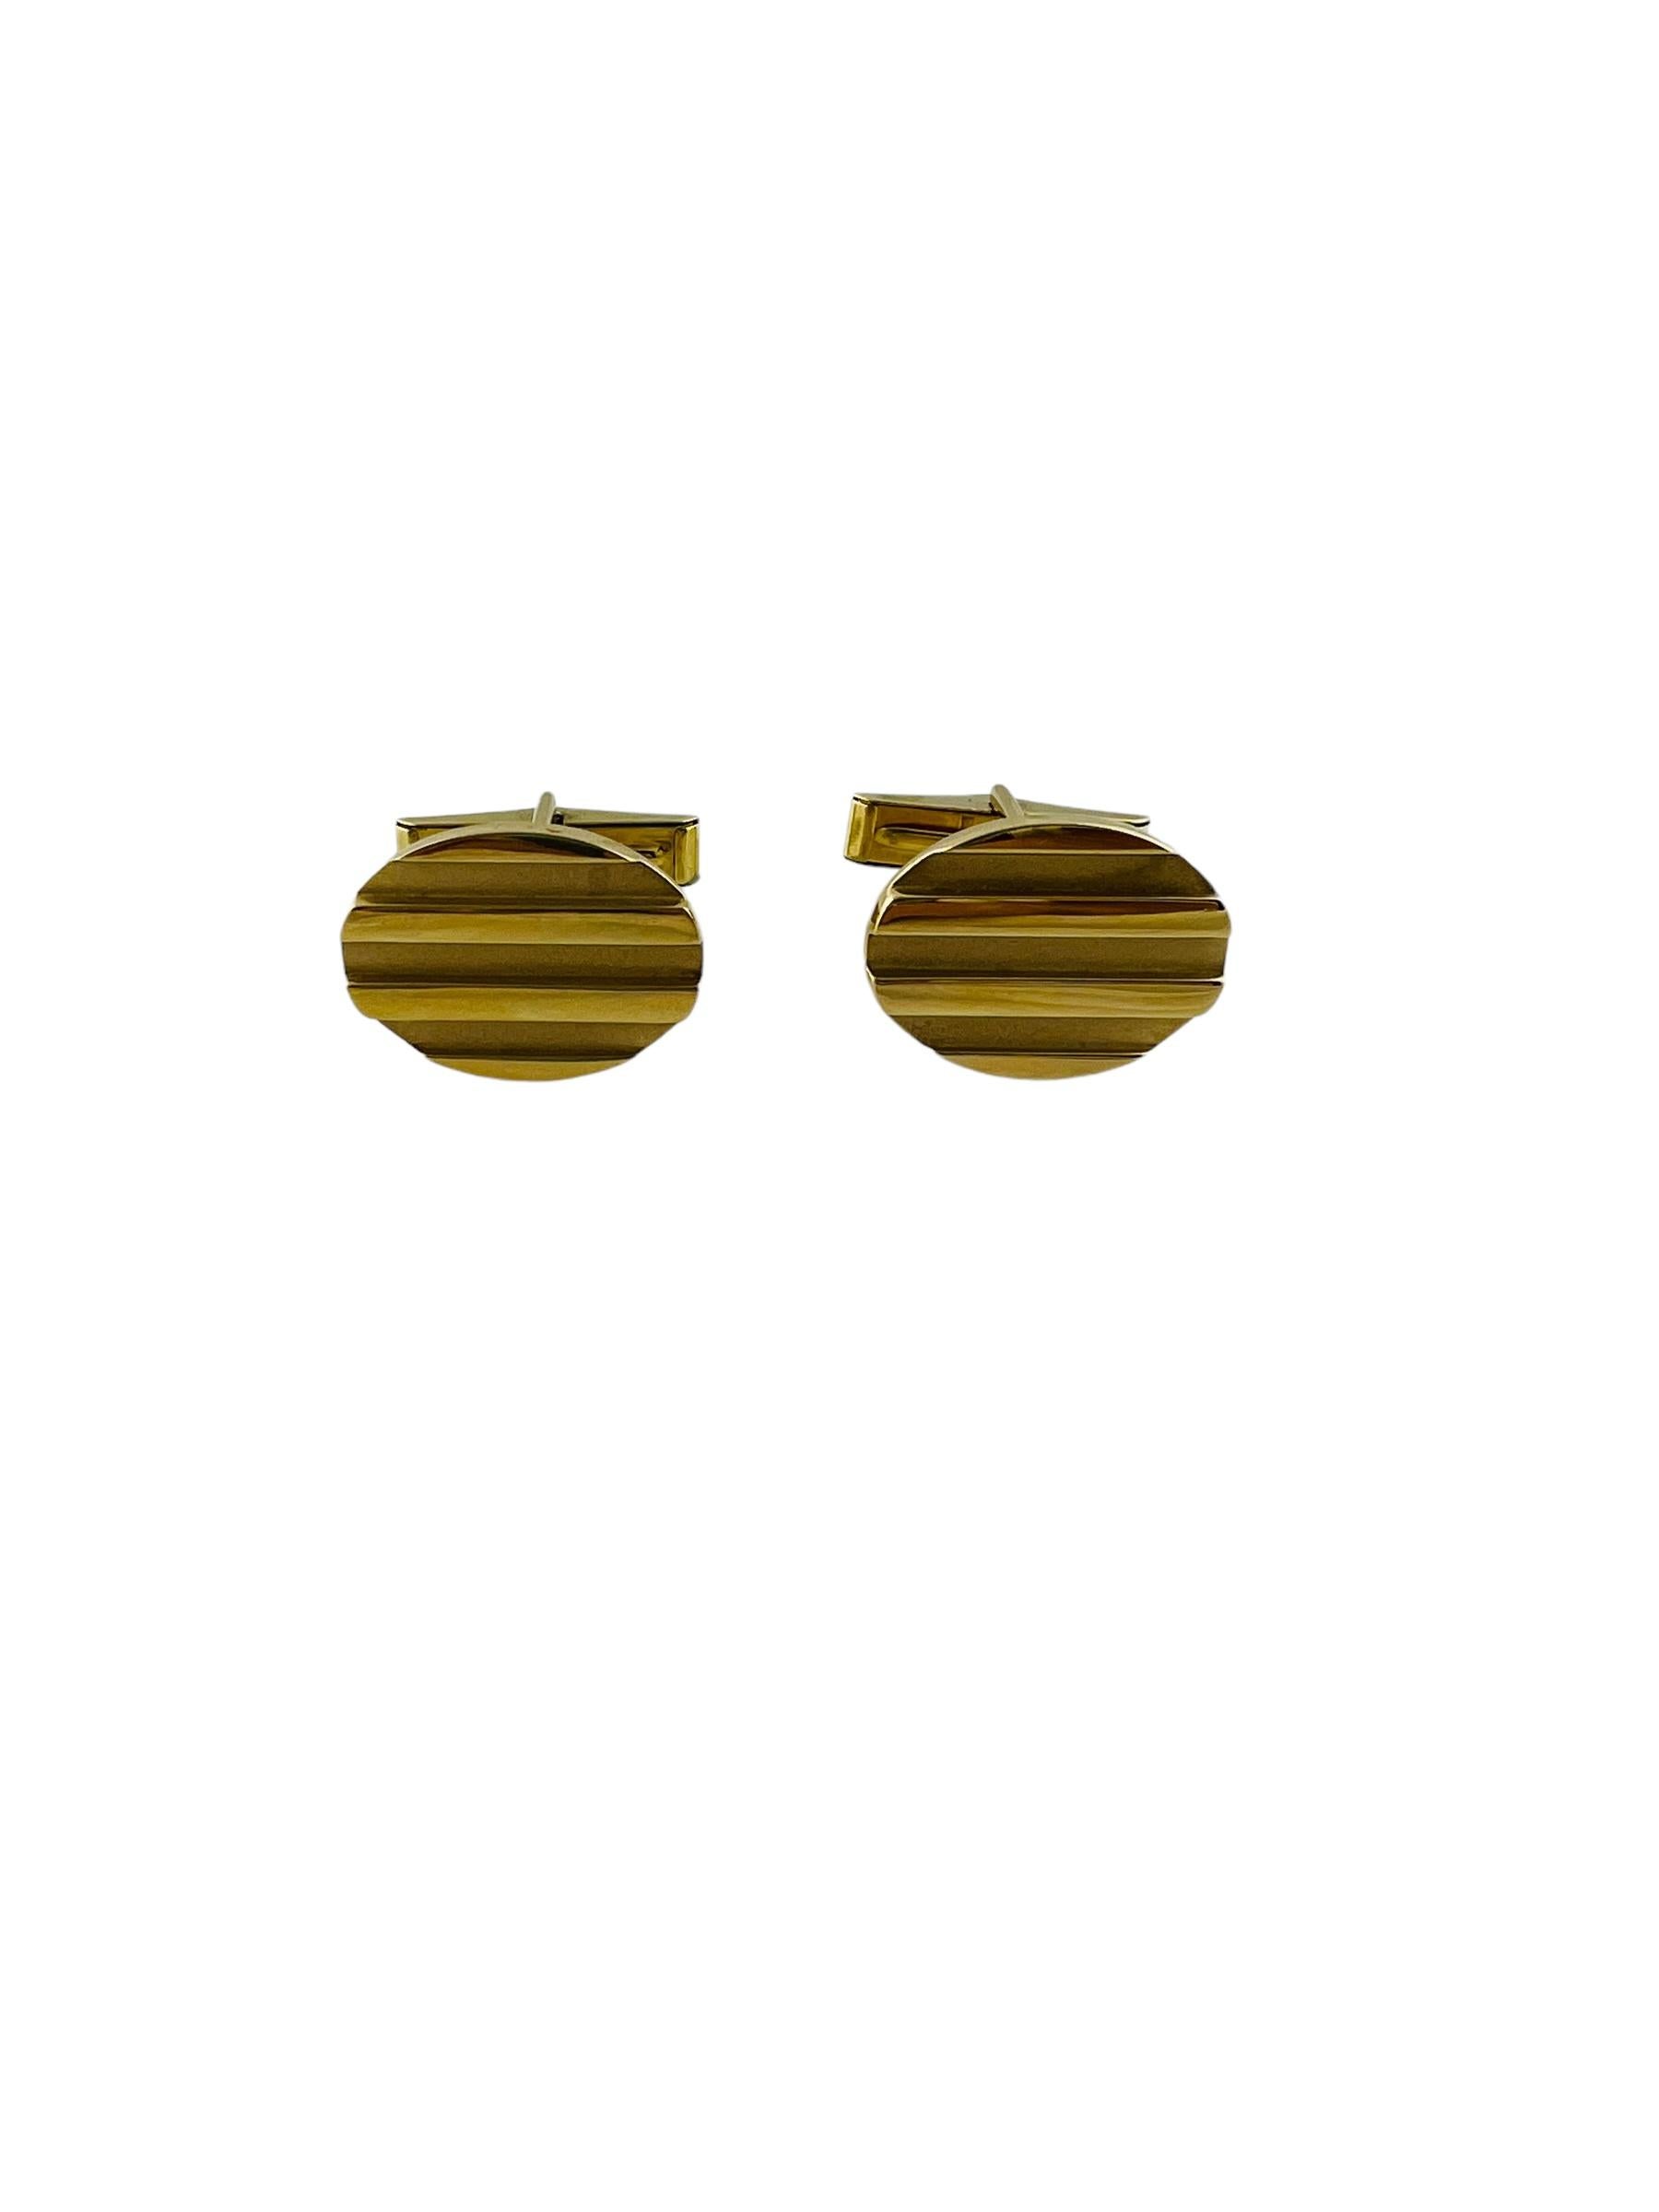 1995 Tiffany & Co. 18K Yellow Gold Oval Striped Cufflinks

These Tiffany & Co. cufflinks are set in 18K yellow gold.

The front of the cufflinks are oval with raised stripes. Stripes are polish gold / in between is textured gold.

Cufflinks measure